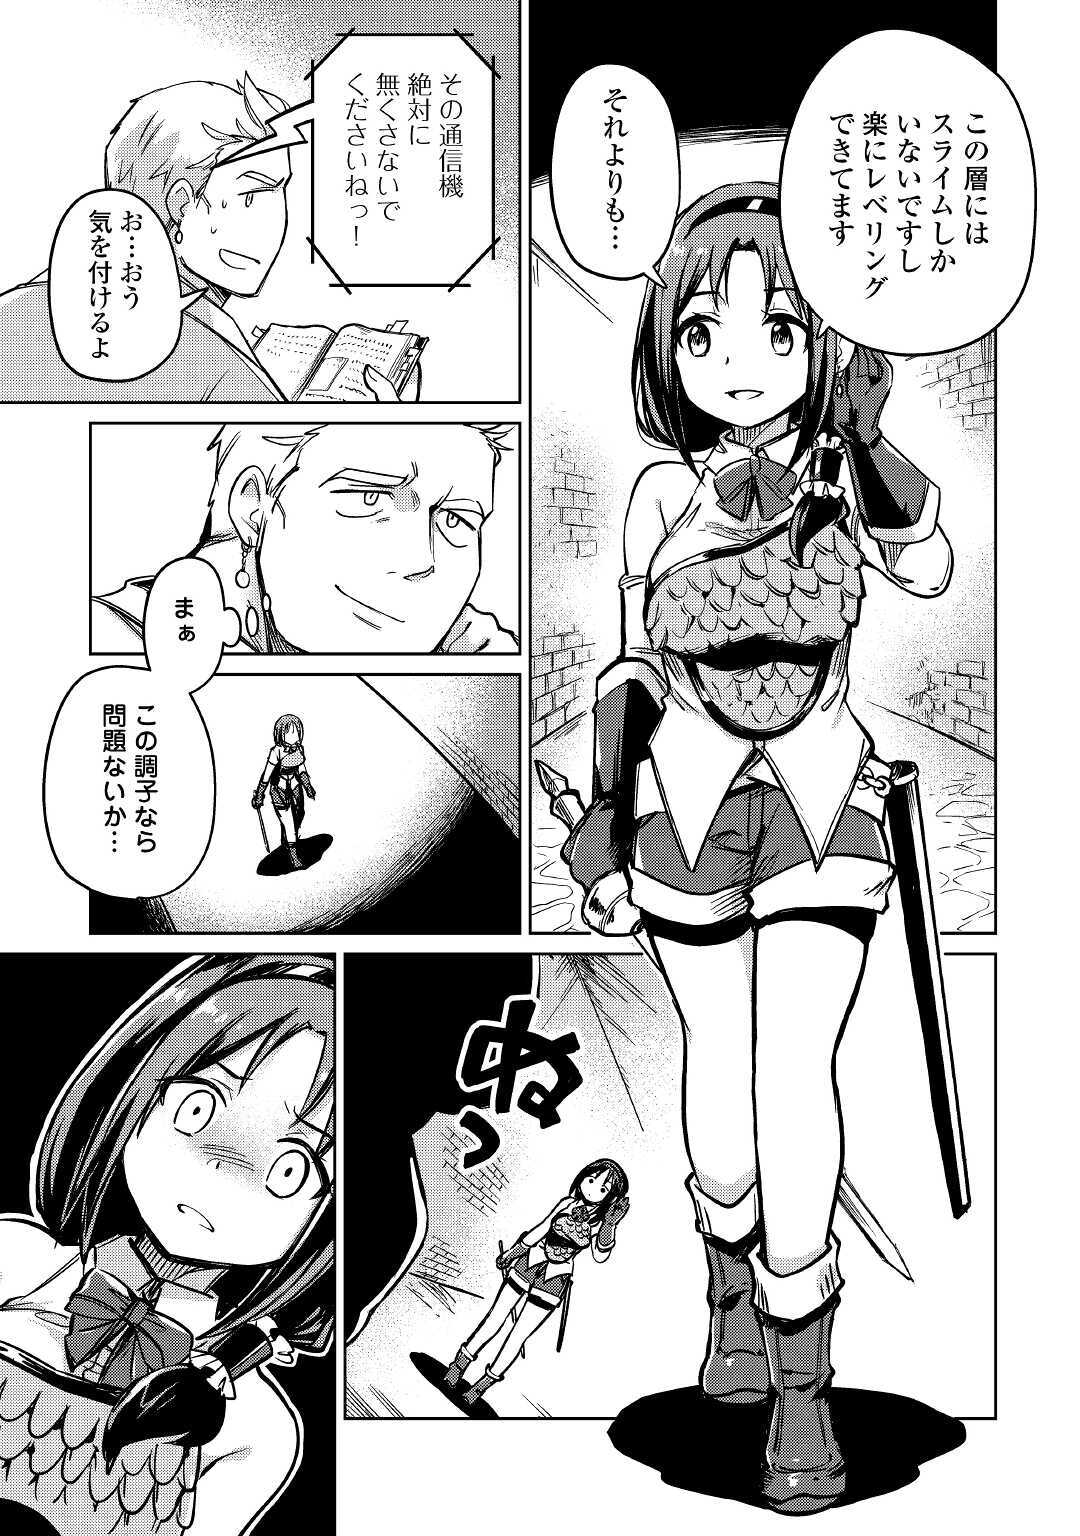 The Former Structural Researcher’s Story of Otherworldly Adventure 第26話 - Page 13